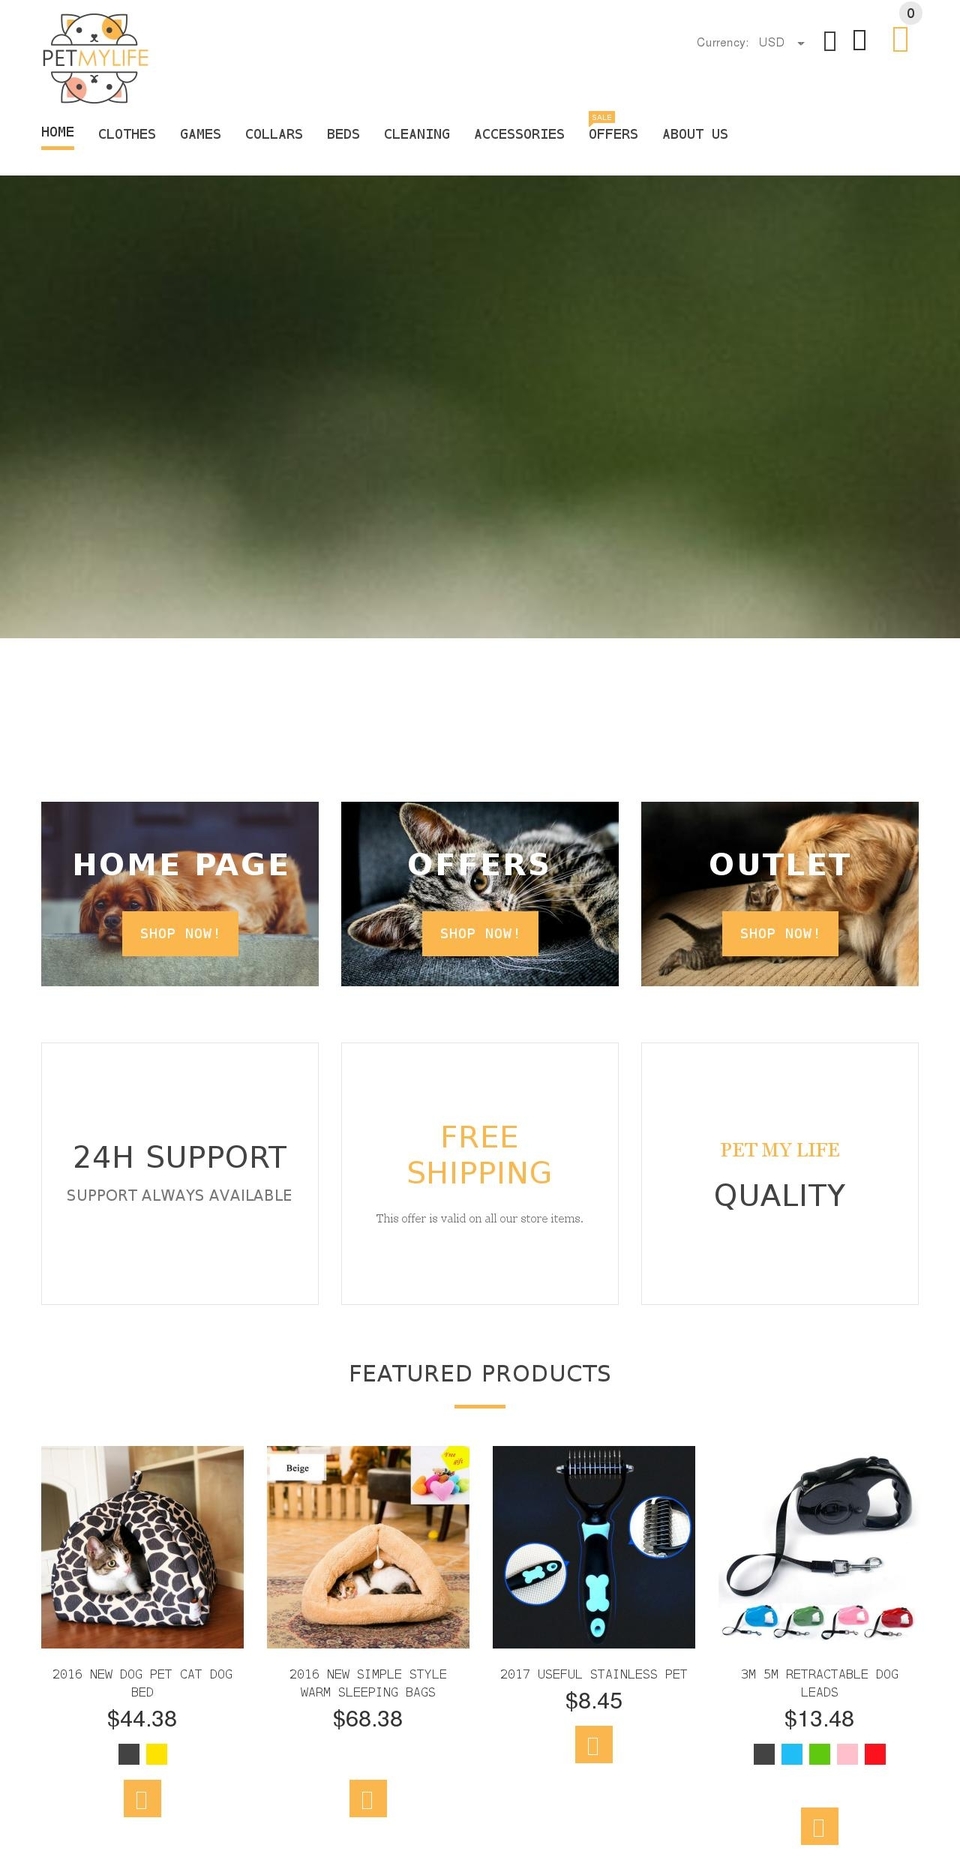 yourstore-v2-0-1 Shopify theme site example petmylife.com